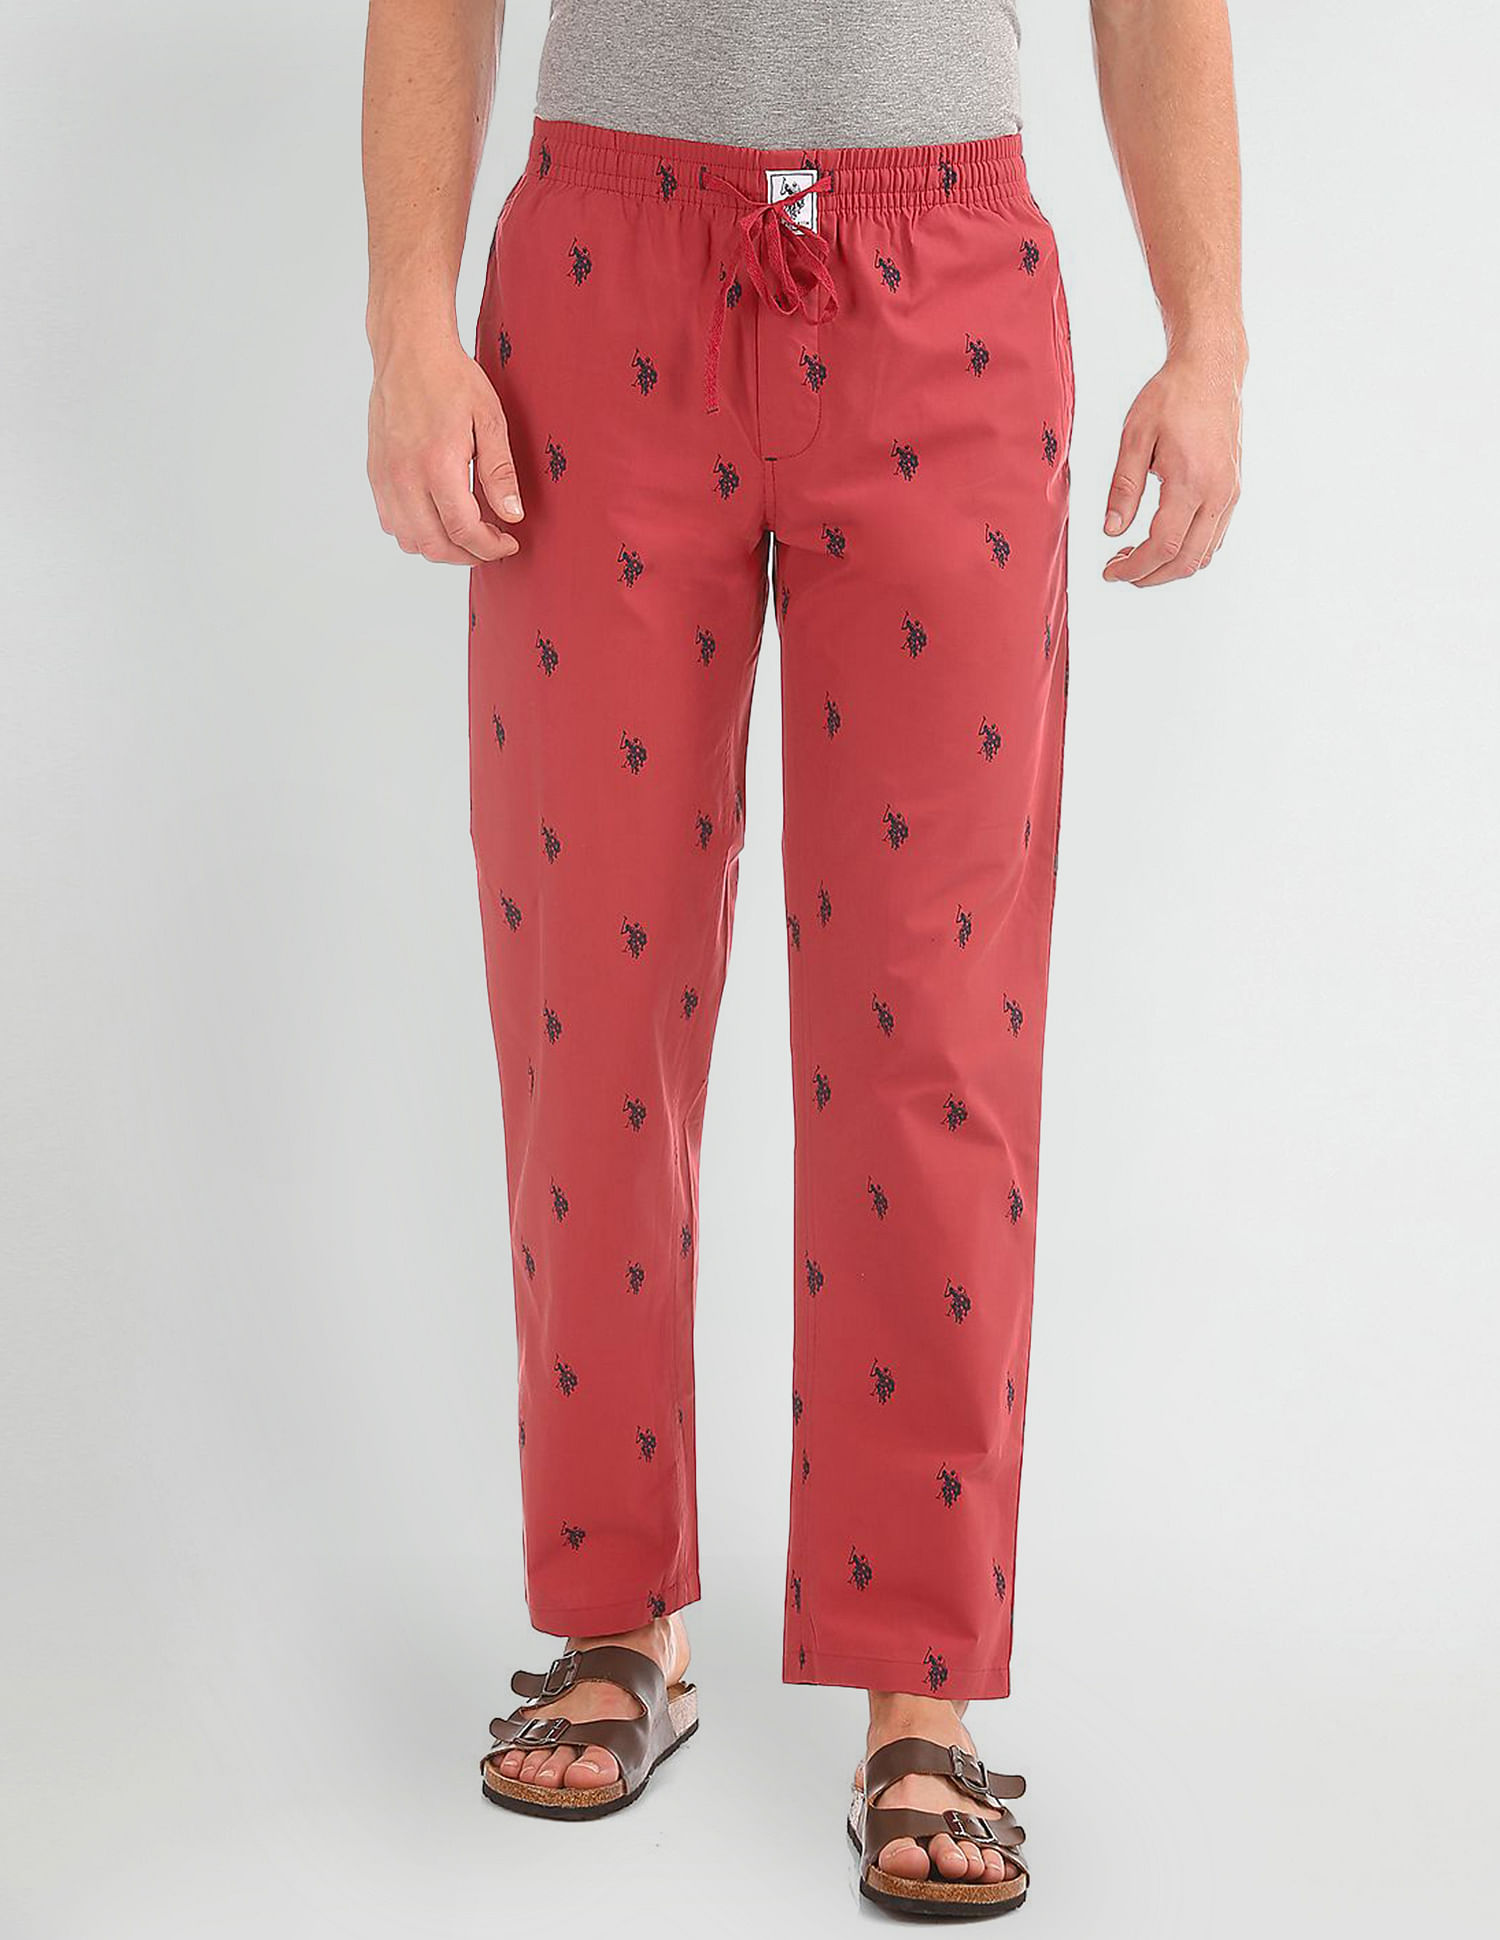 Cotton Track Pants For Women Lounge Pants With Pockets on sale Coral Red   Cupid Clothings